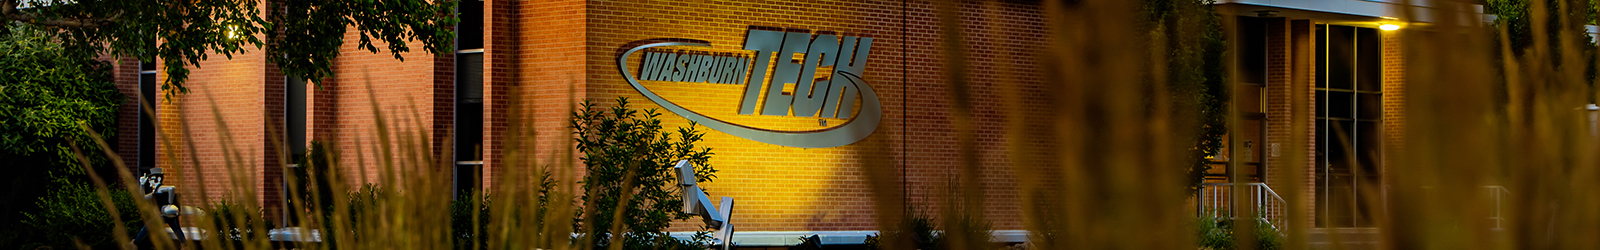 Washburn Tech front of main building